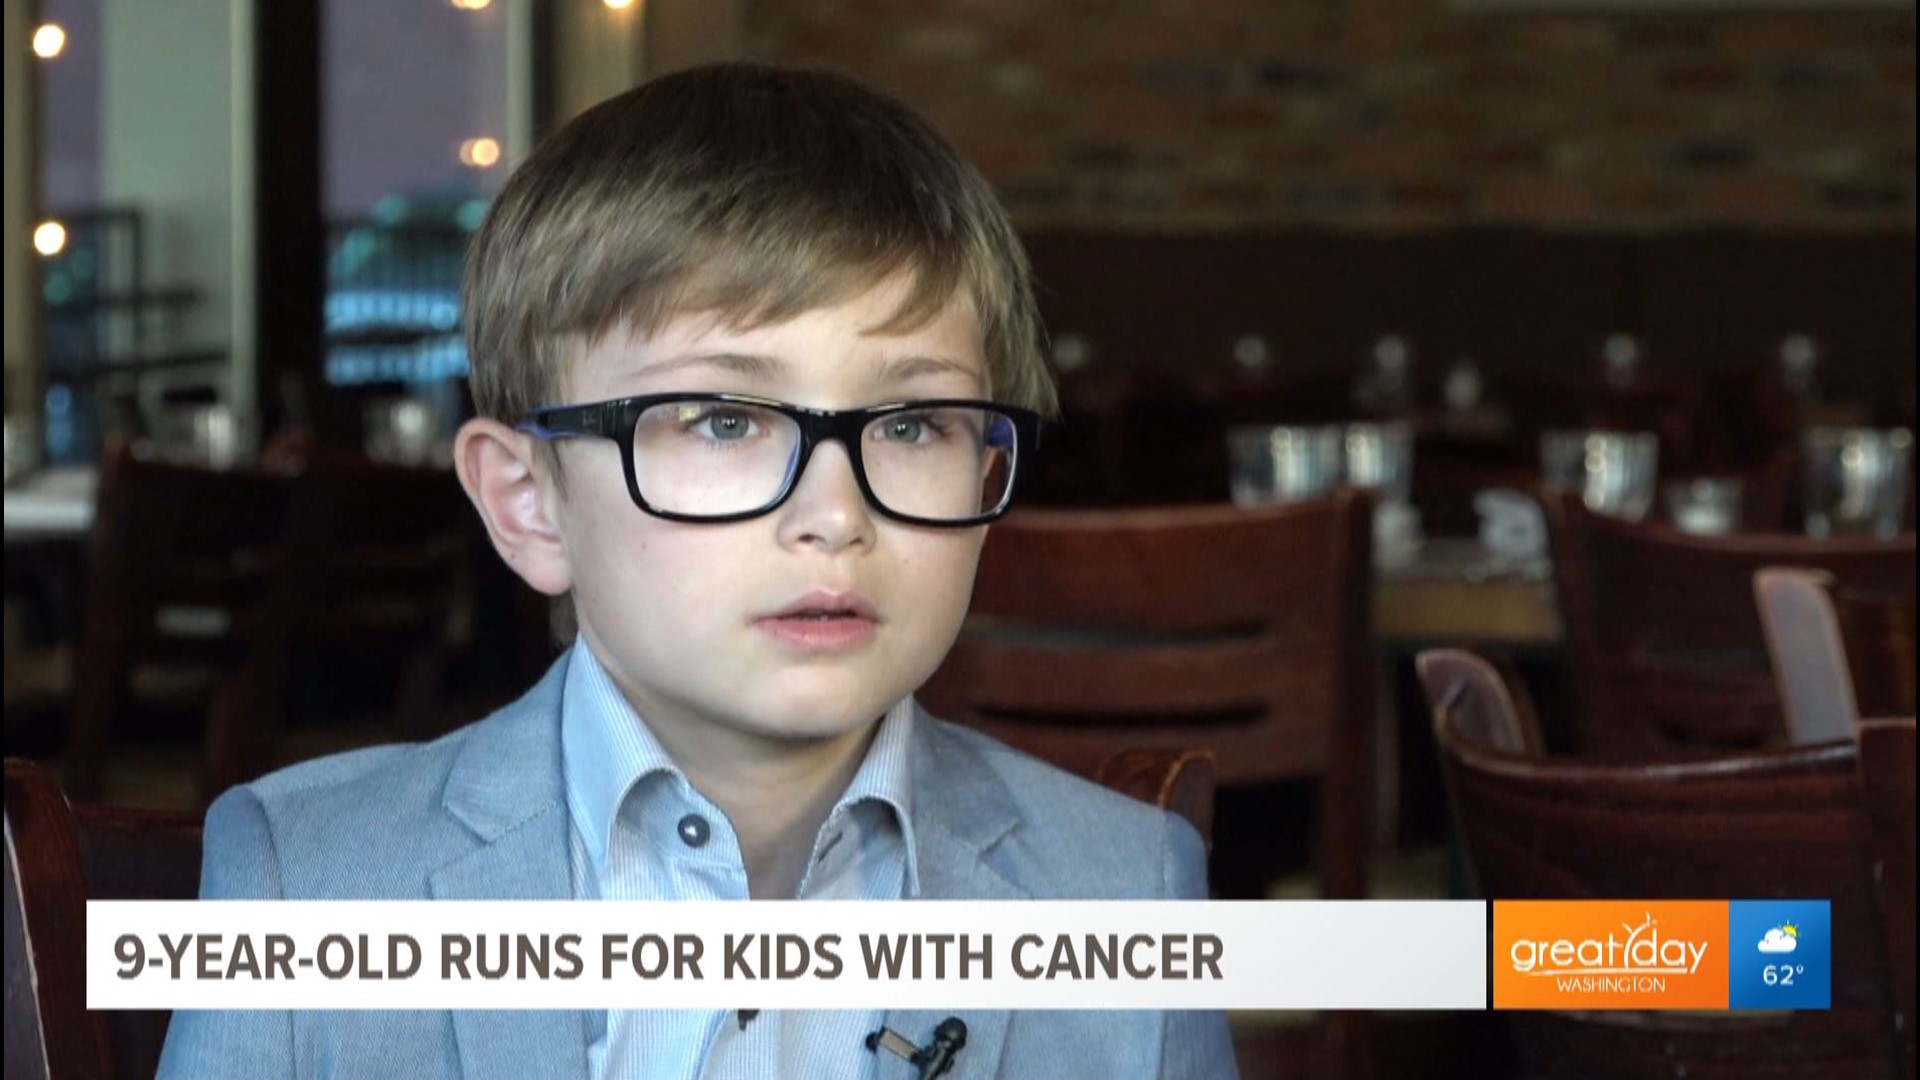 9-year-old Matteo is set to run 100 miles to raise money for Hopecam, which in turn helps kids with cancer. This segment sponsored by Apple Federal Credit Union.